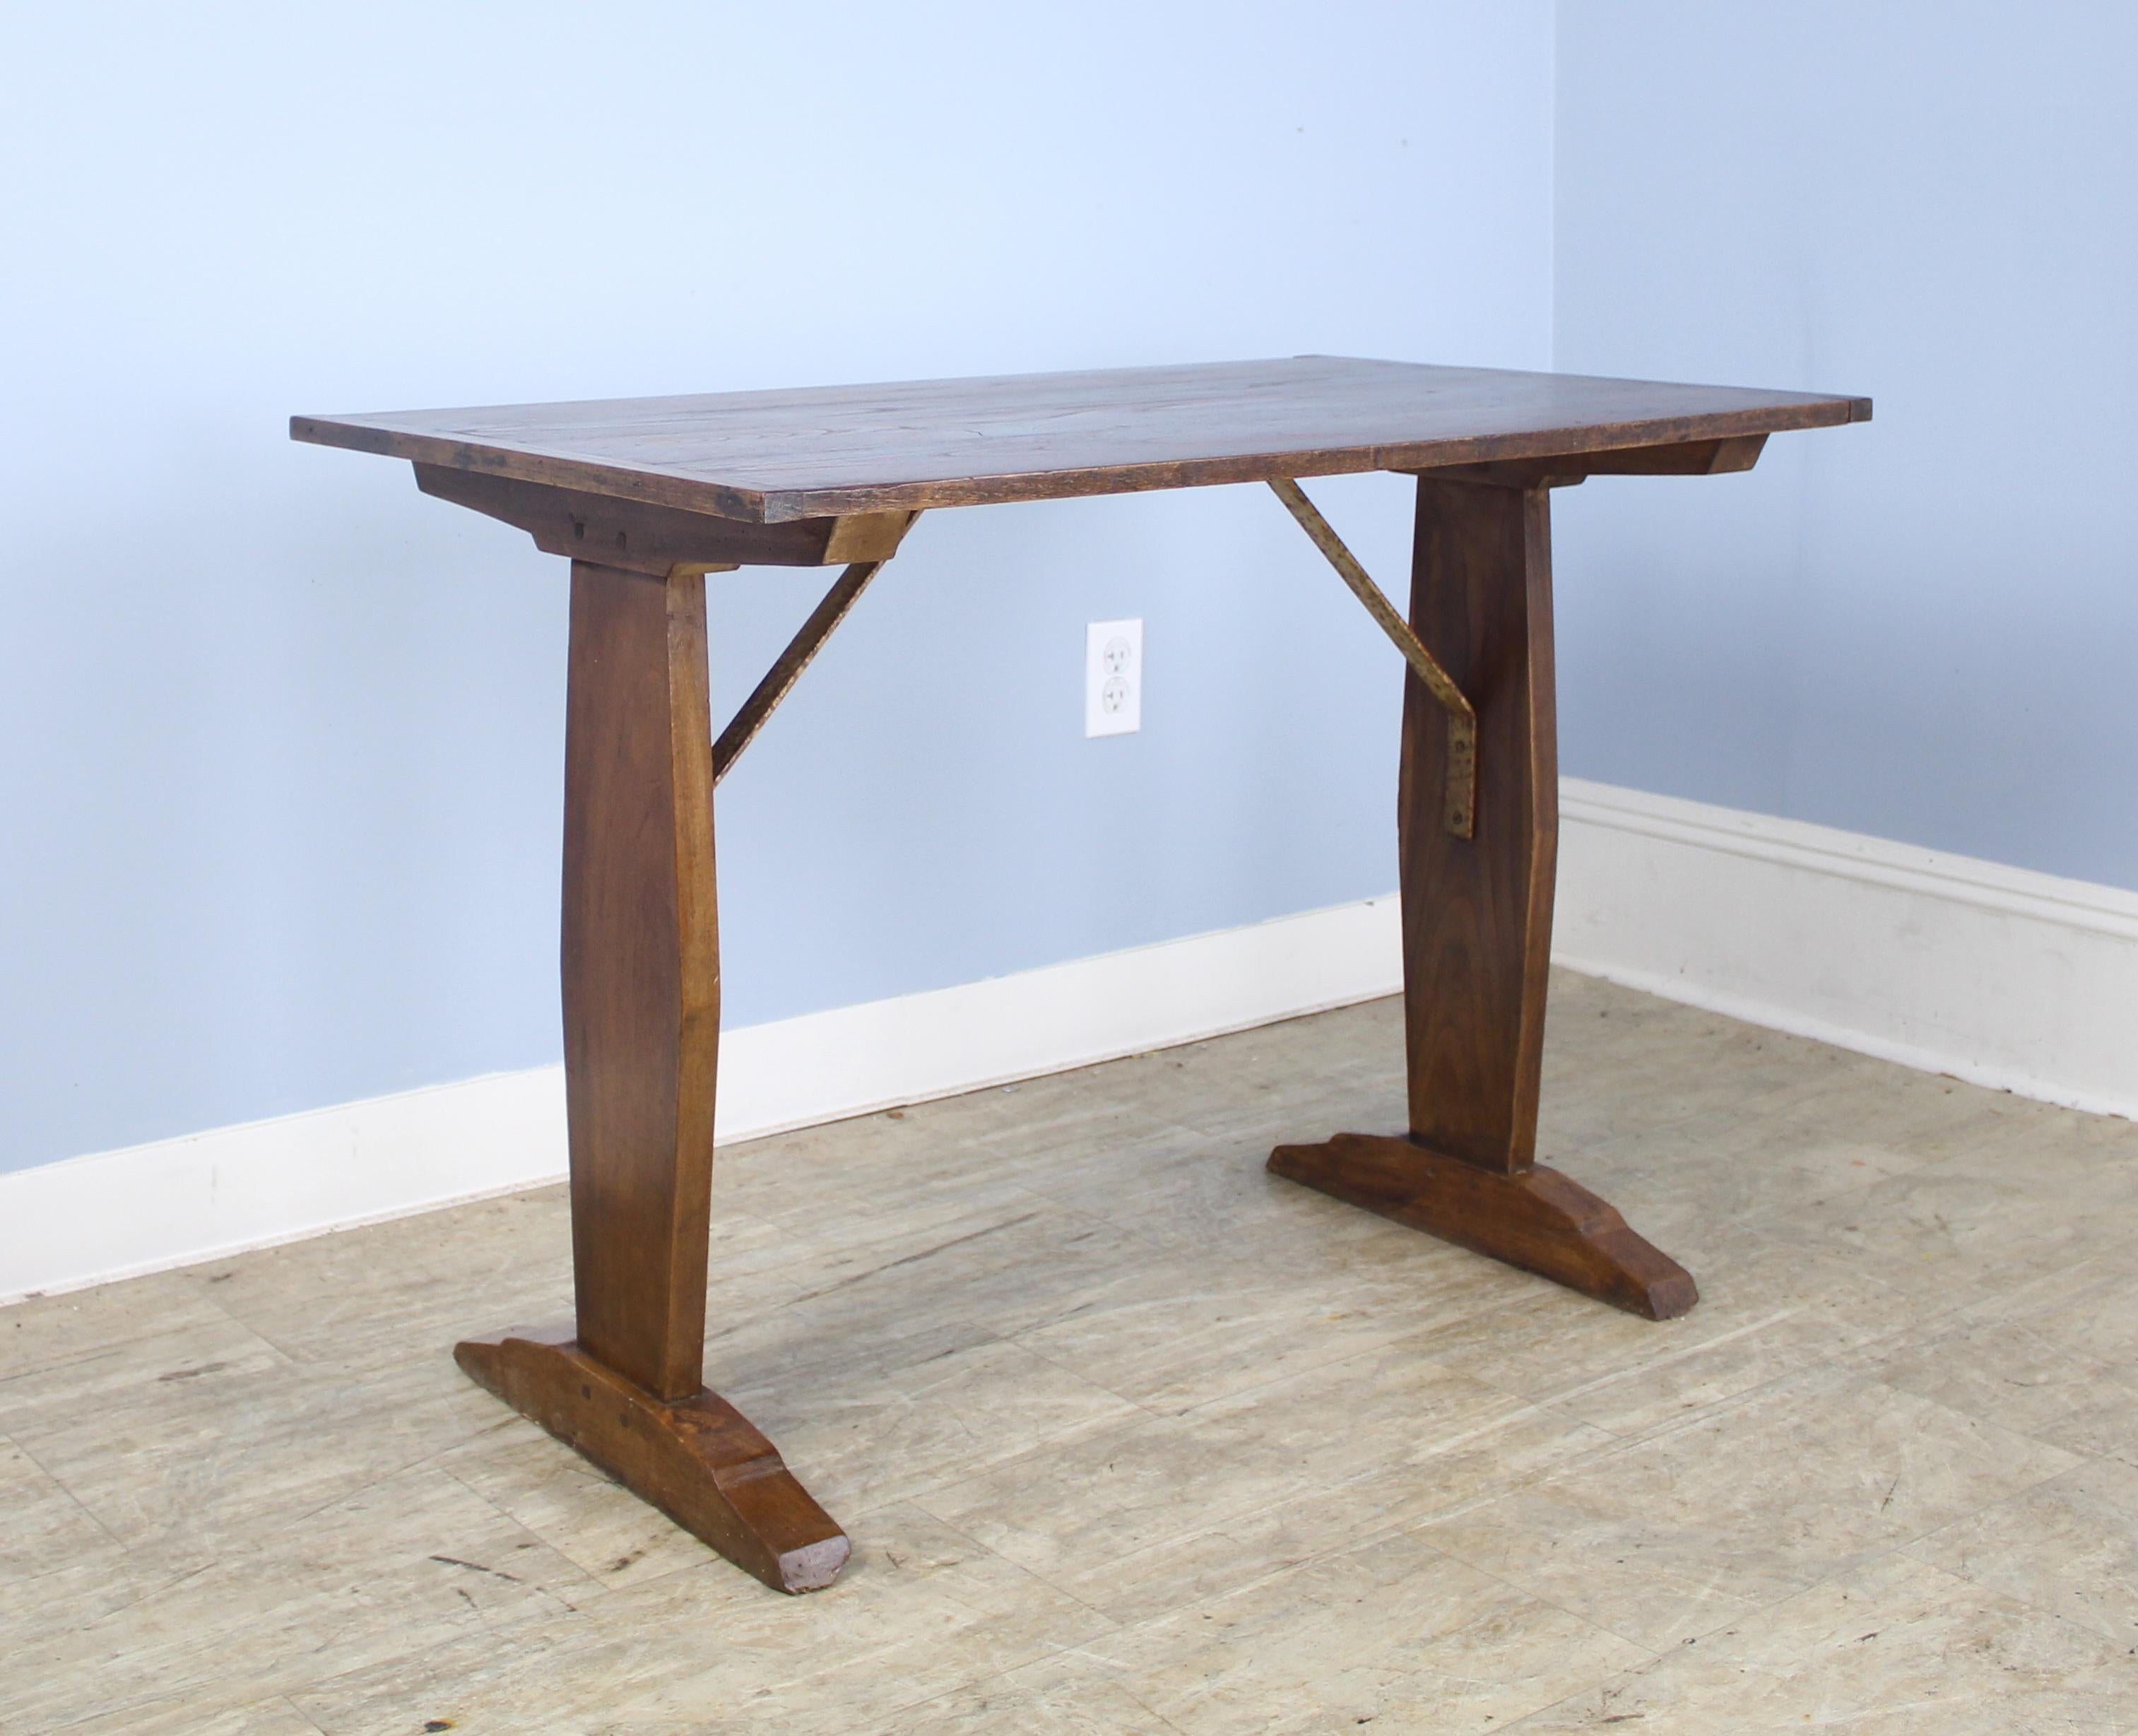 A pretty little breakfast or occasional table, originally from a French eatery. Good looking fruitwood color and grain, with interesting distressed iron supports. If you are looking for two, we have an almost identical one, reference #0621-M68B.